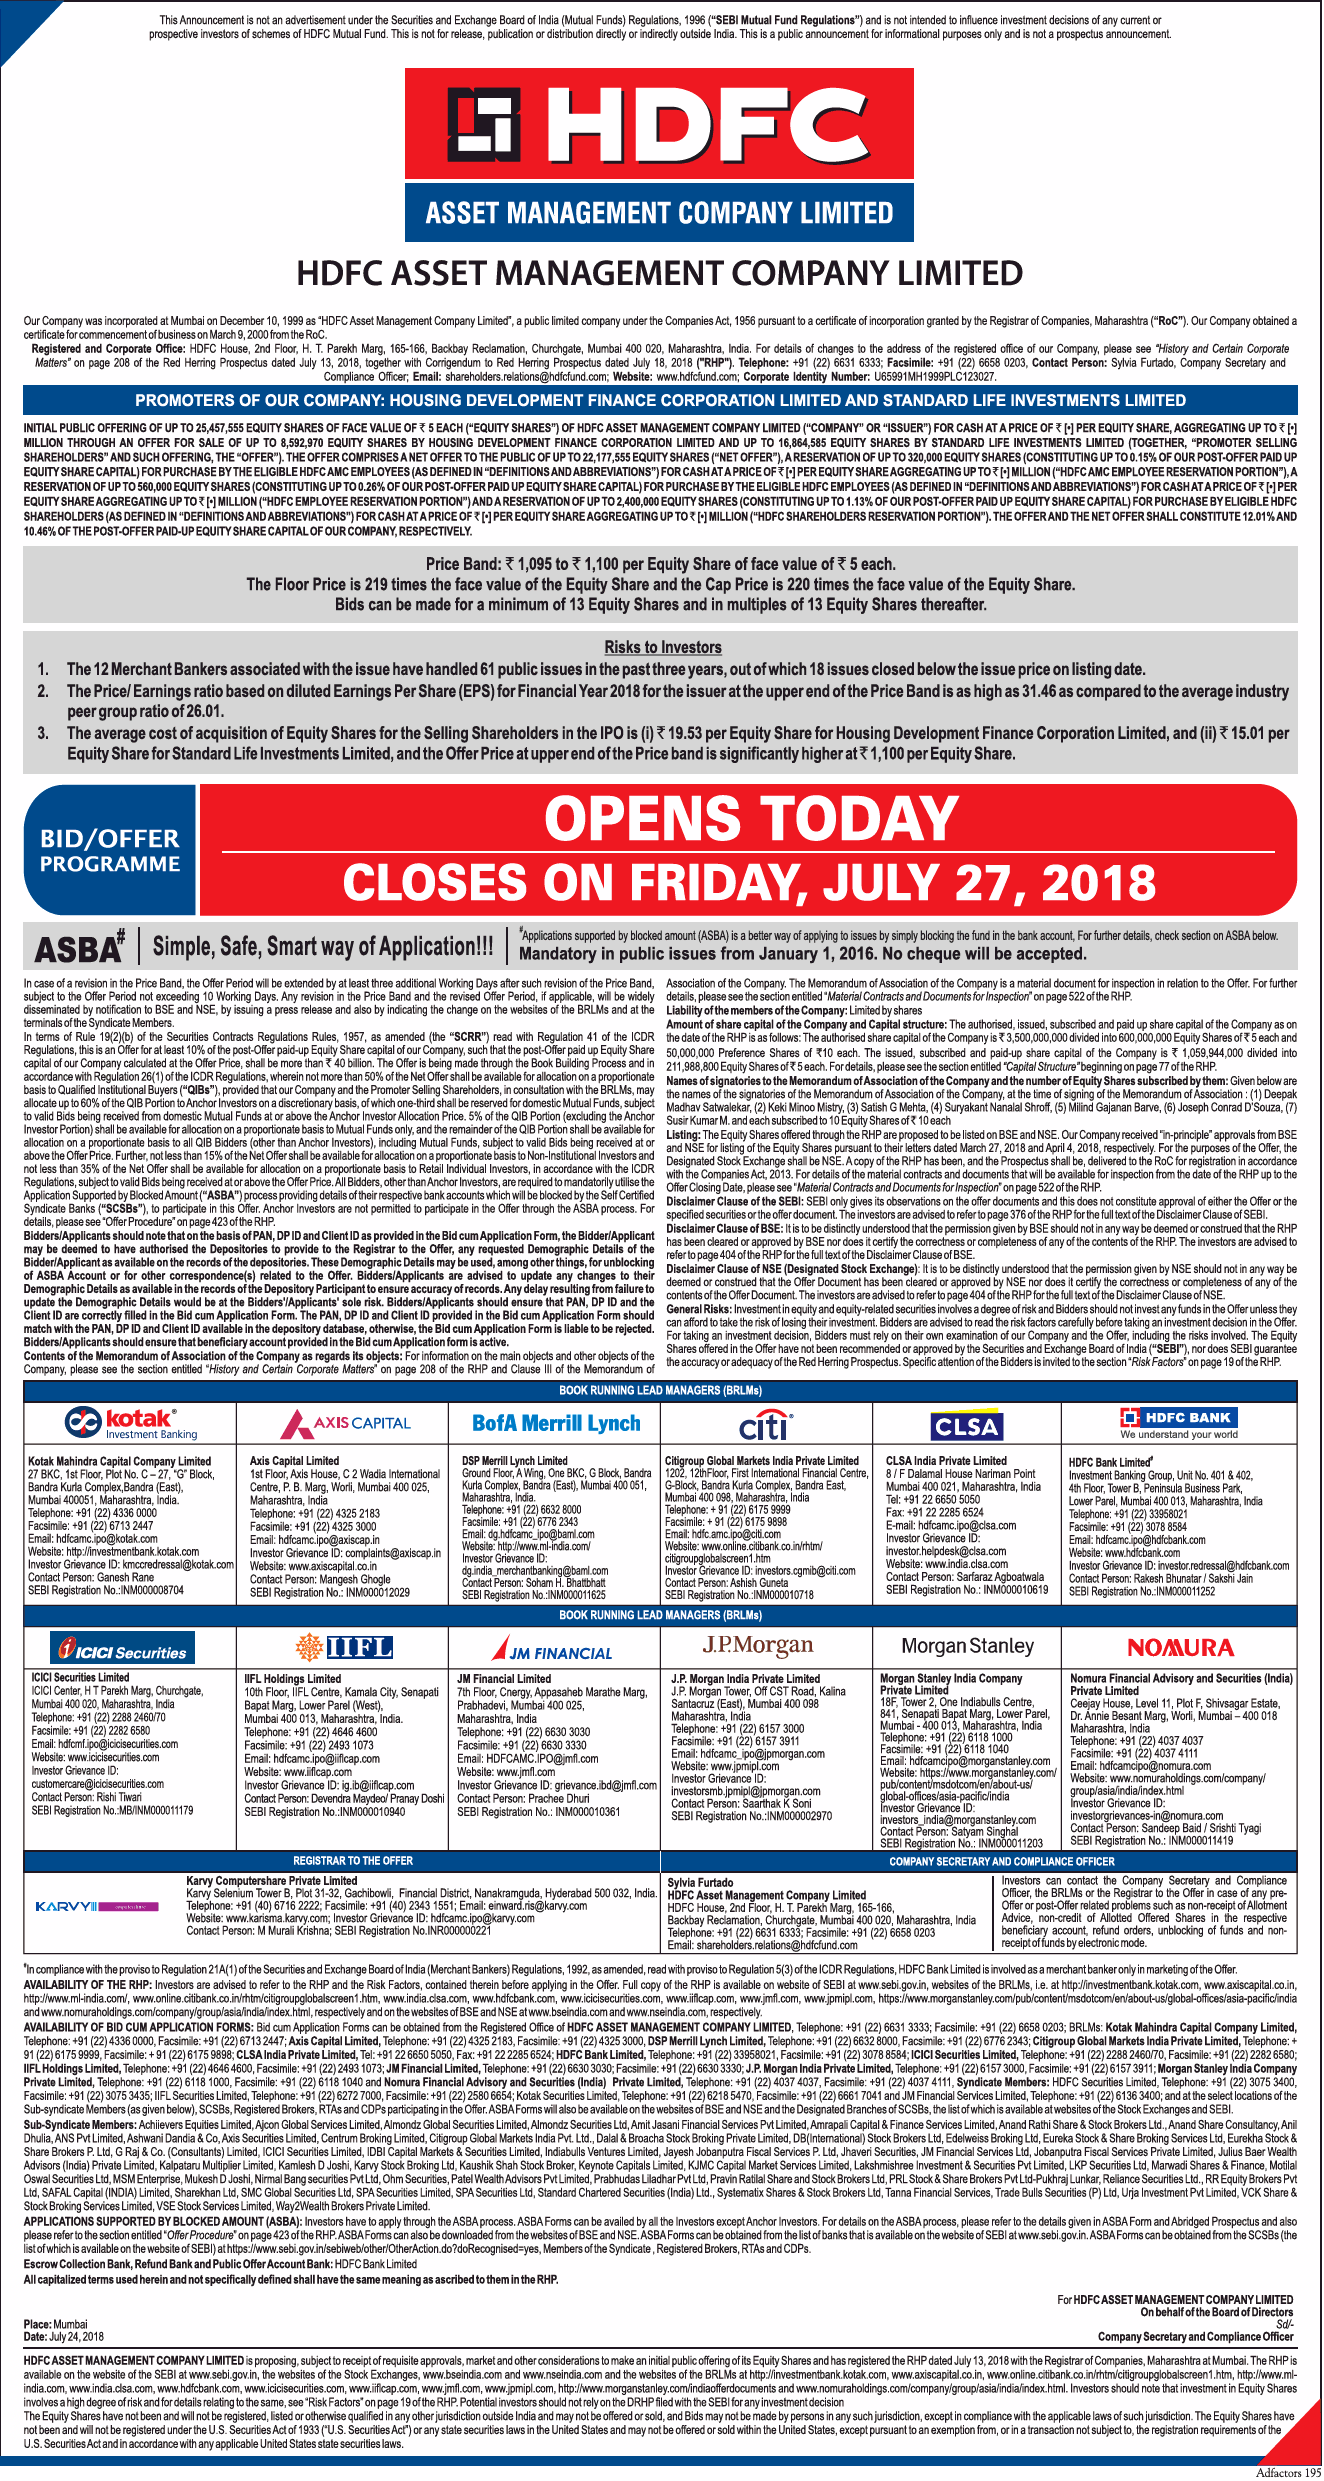 hdfc-asset-management-company-limited-bid-offer-programme-ad-advert-gallery